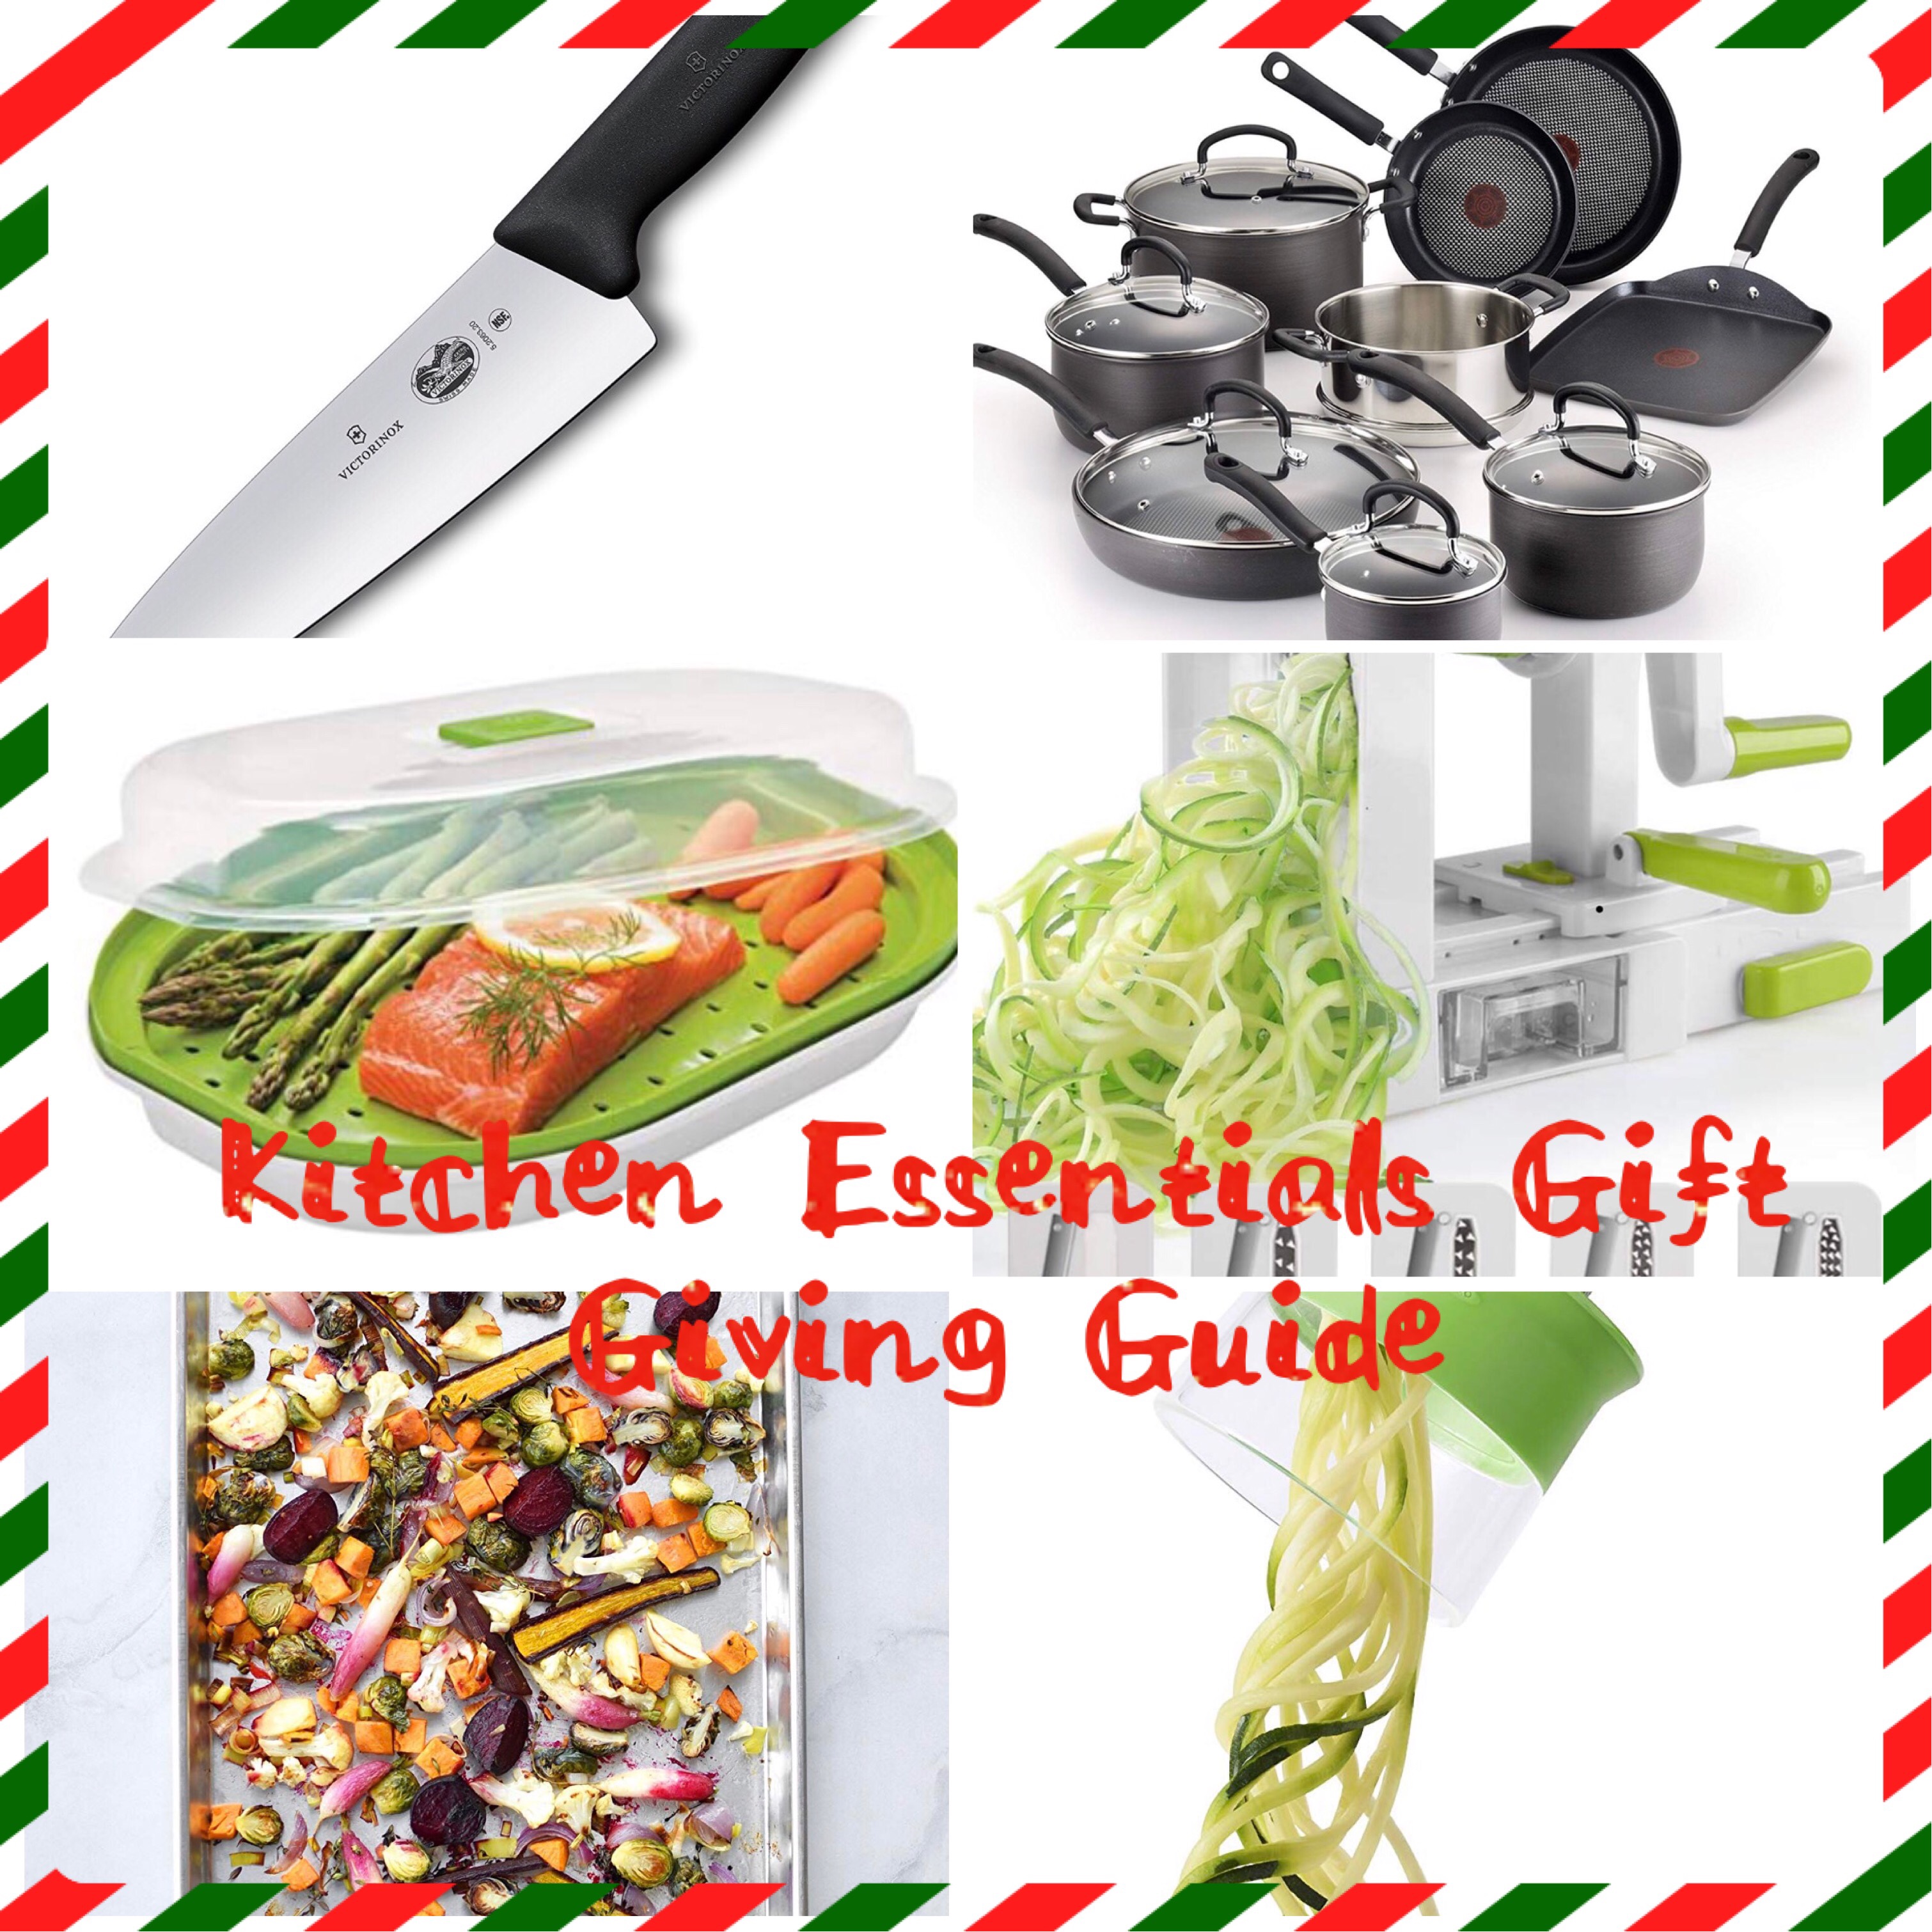 Kitchen Essentials Guide, Cooking For One